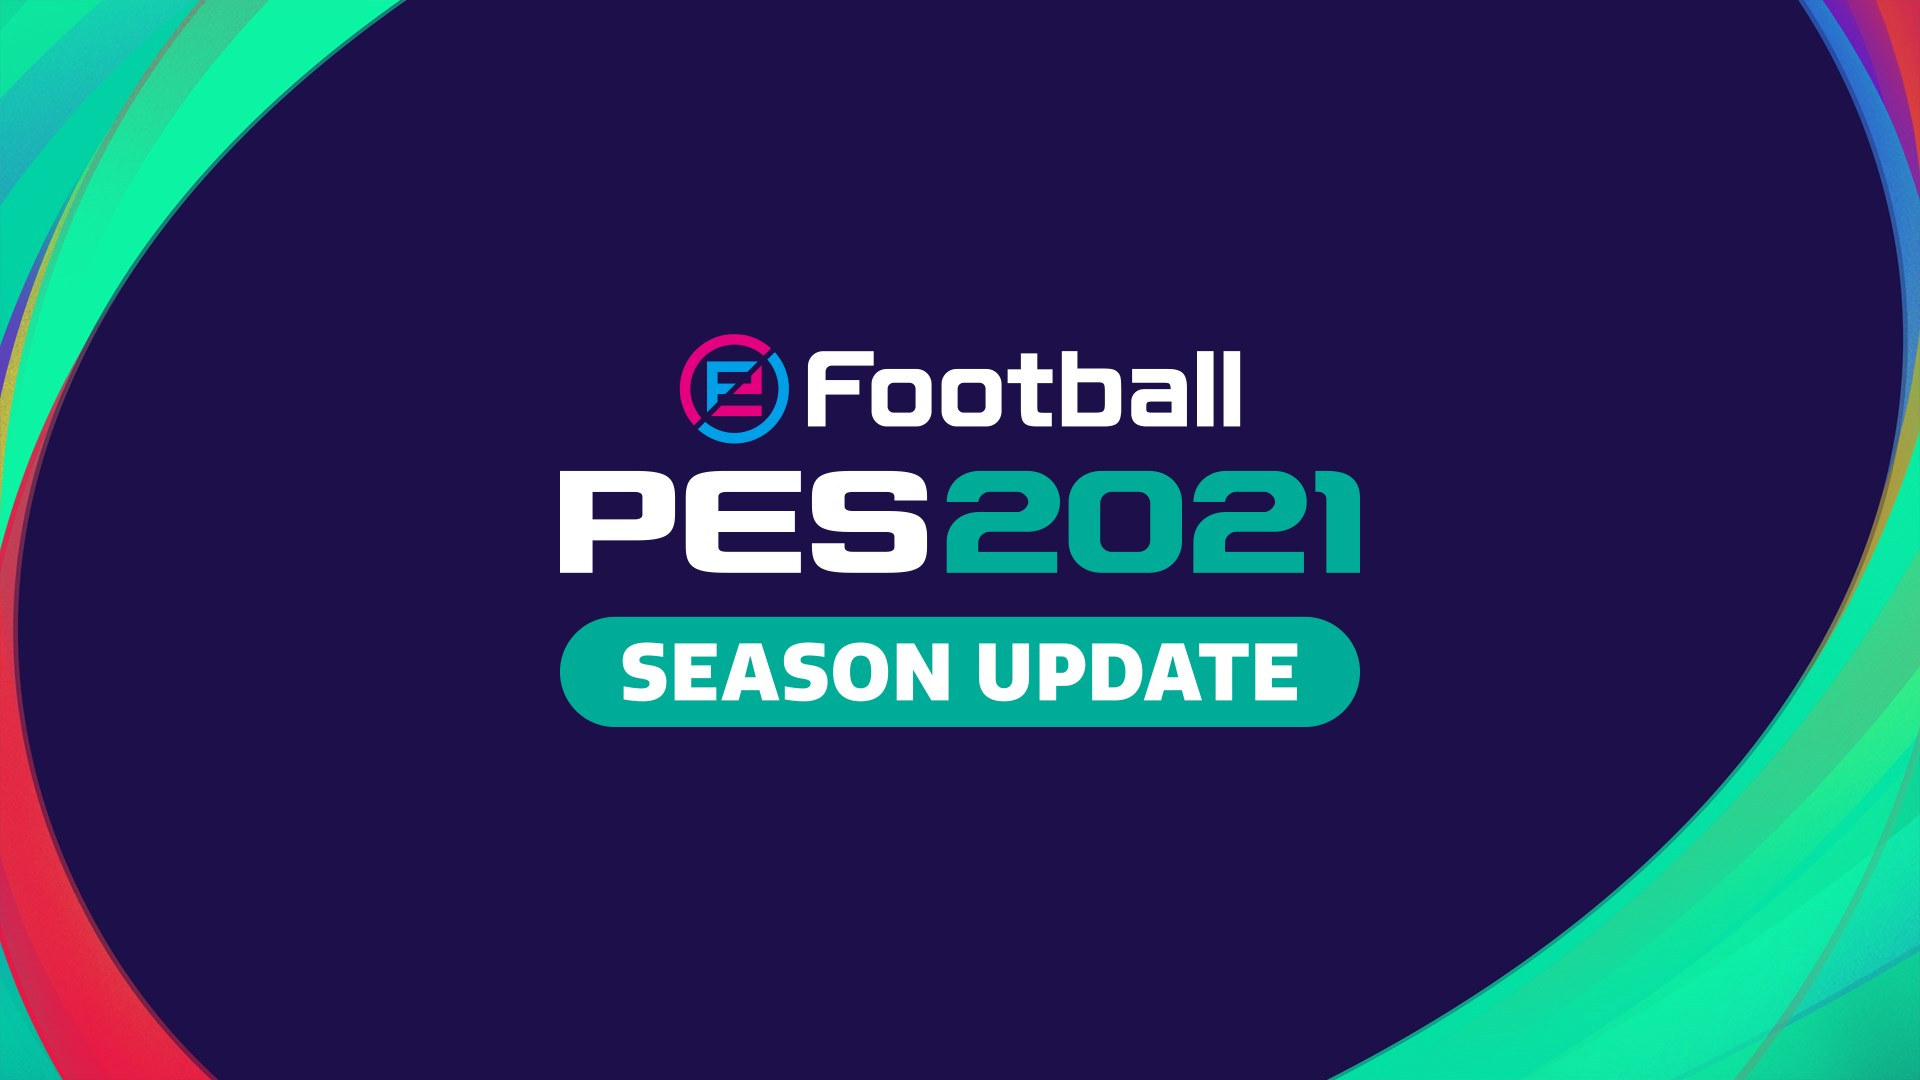 eFootball PES 2021: Season Update confirmed for Xbox One